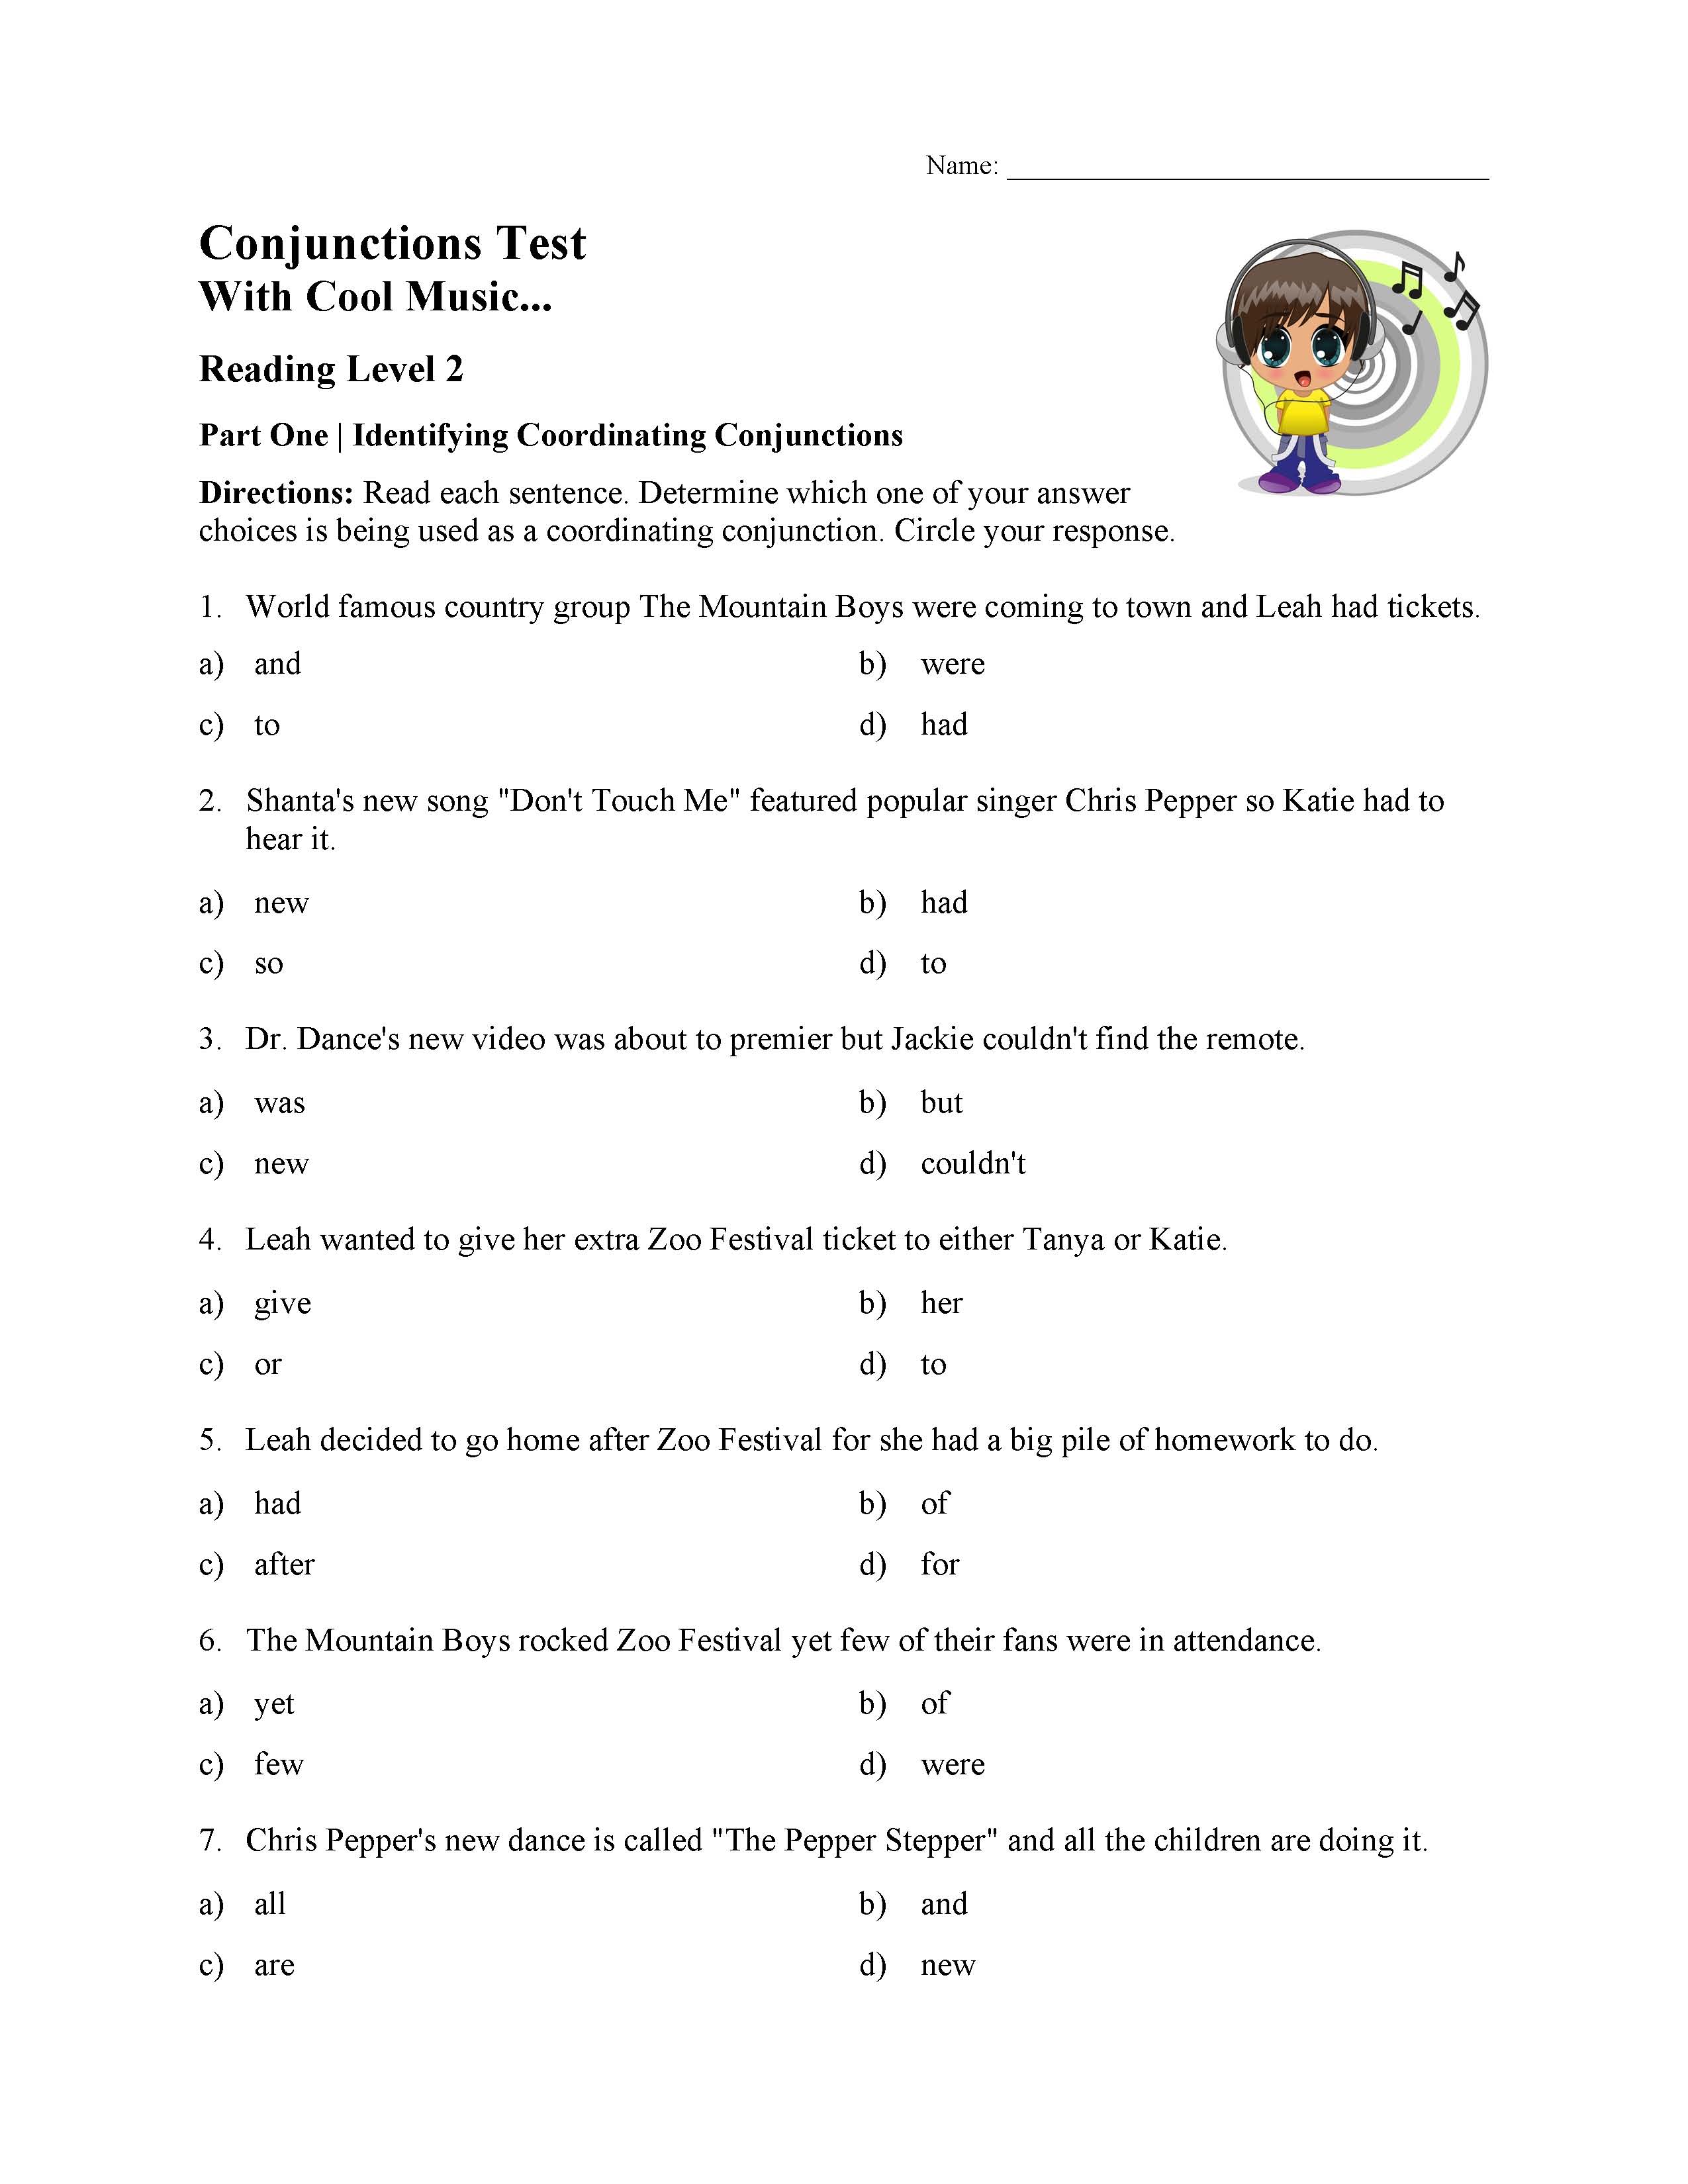 This is a preview image of the Conjunctions Test - Reading Level 2.